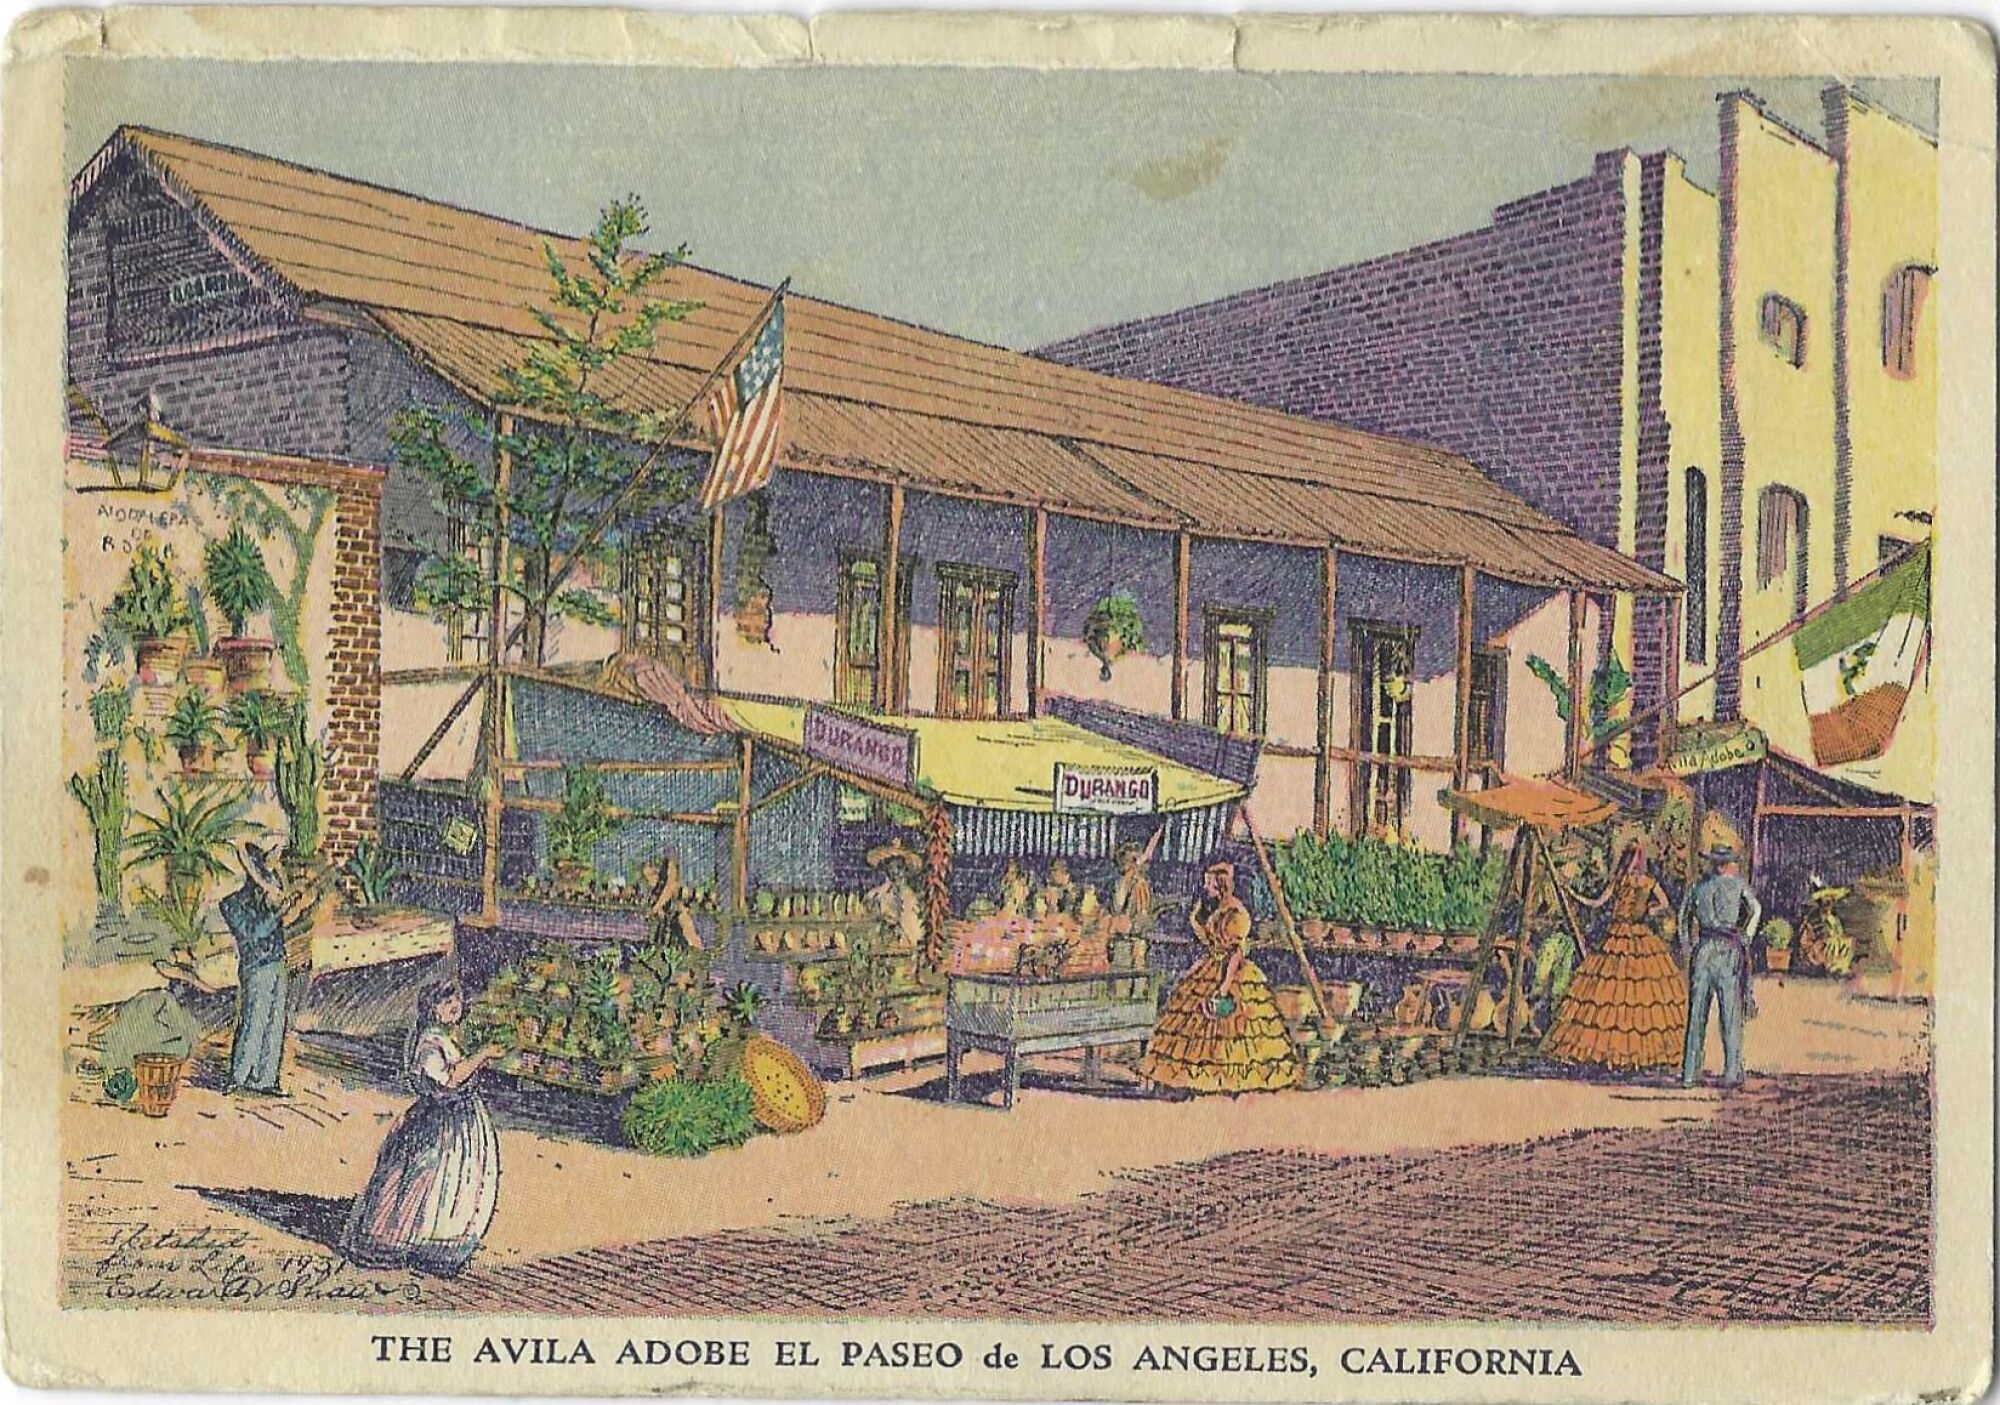 A vintage postcard shows American and Mexican flags flying on Olvera Street, in front of Avila Adobe.